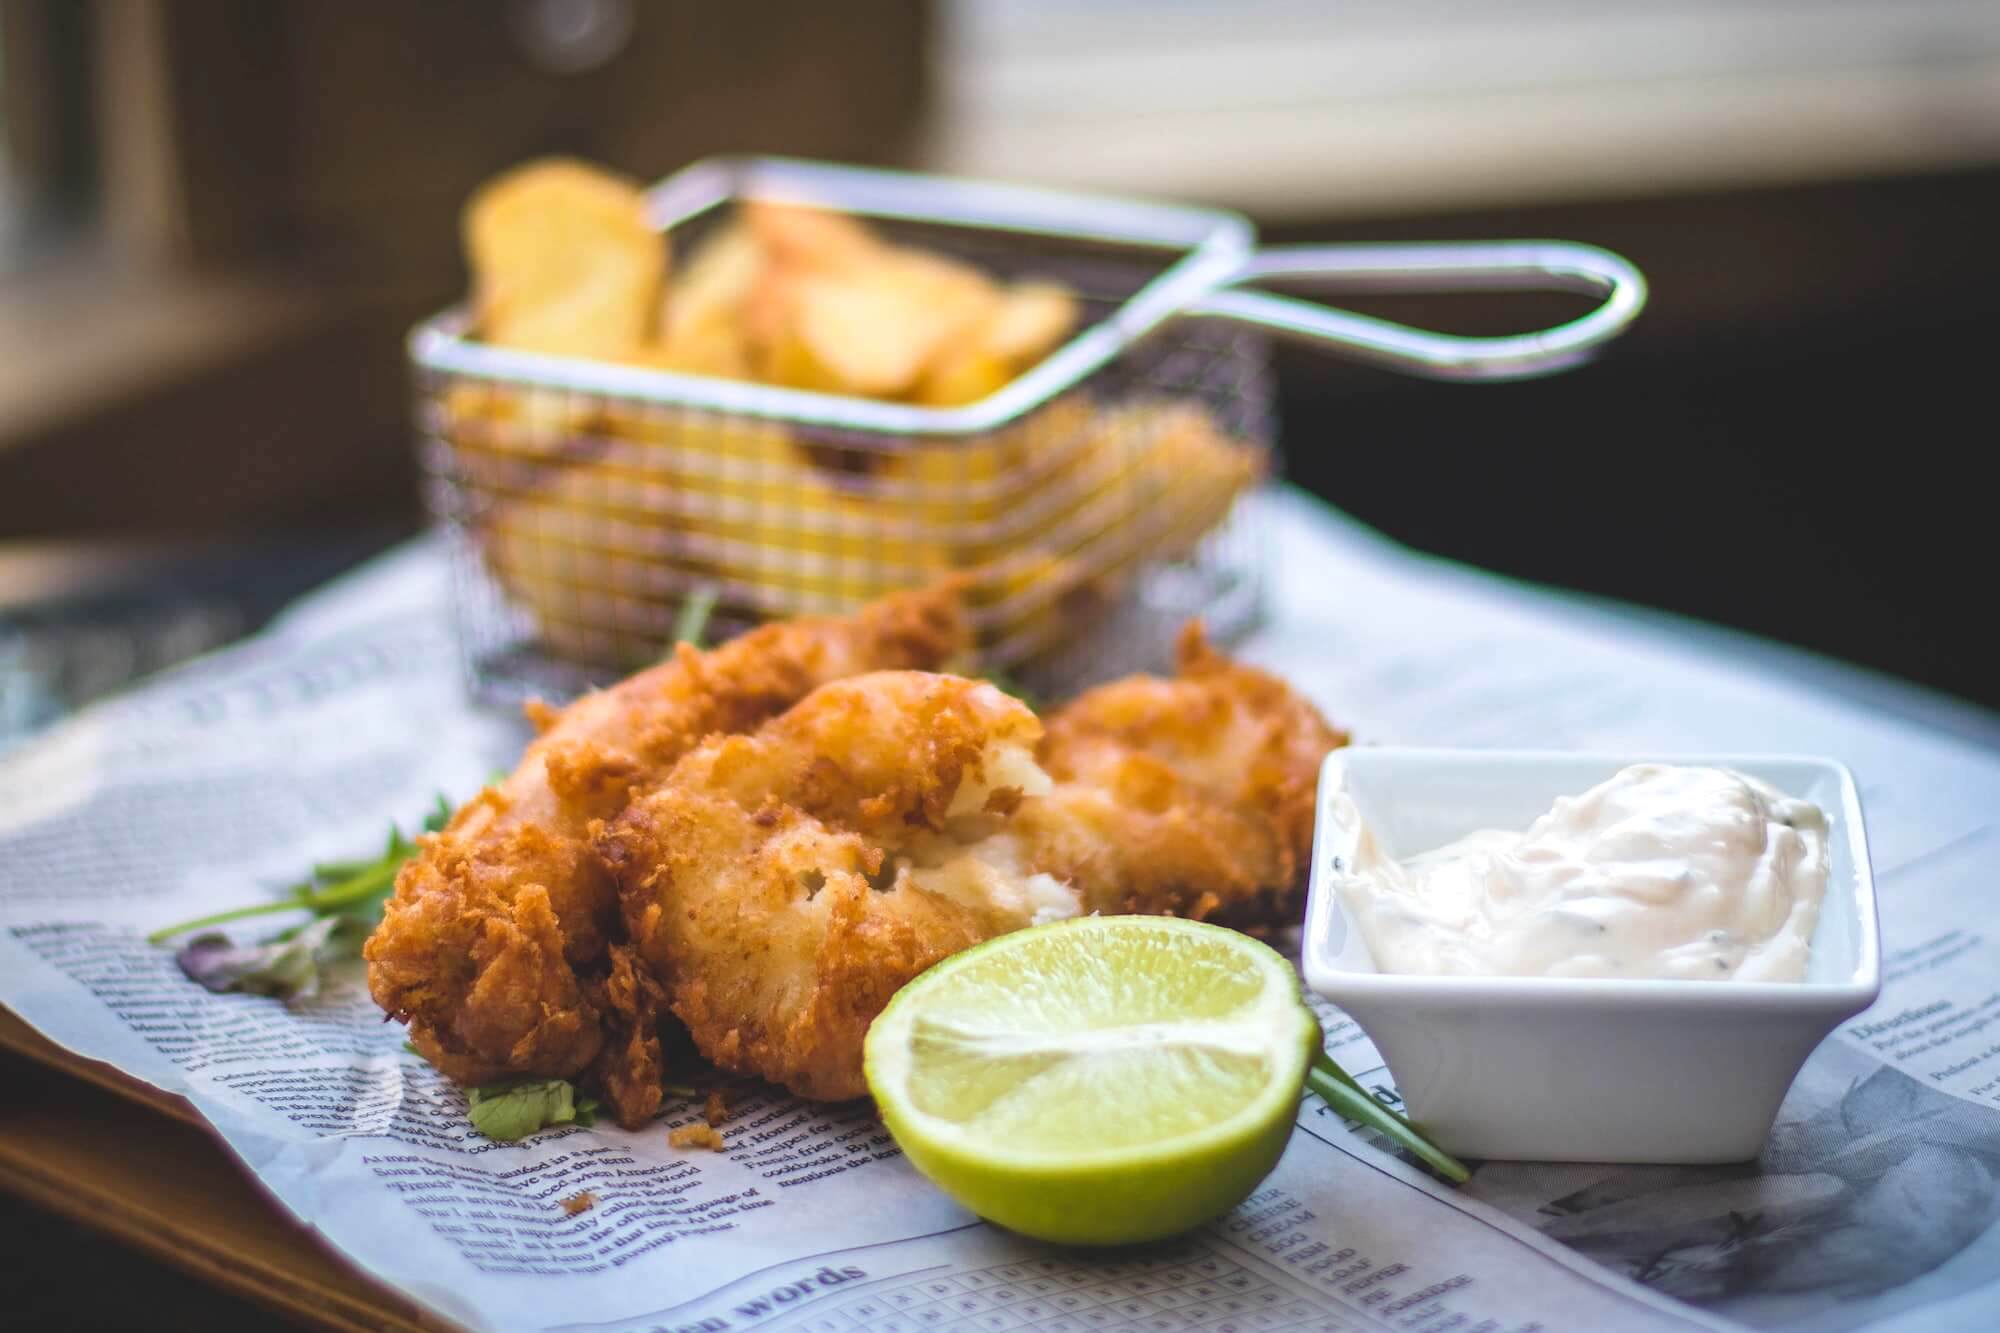 Fried Fish with a lime and horseradish with chips in the background in a metal basket